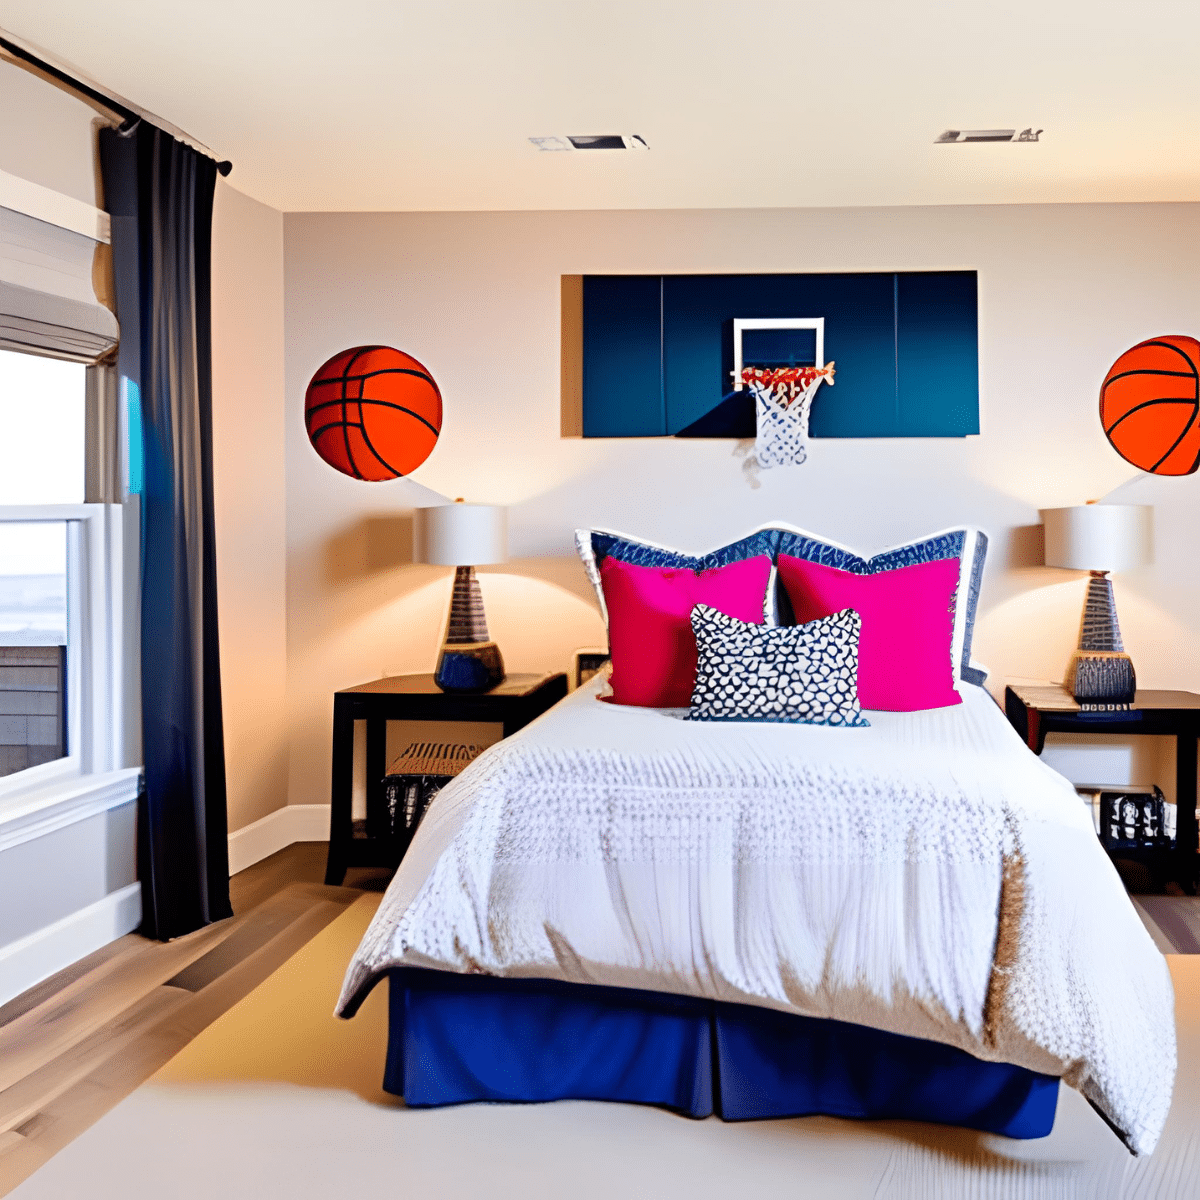 Bedroom with basketball wall decals